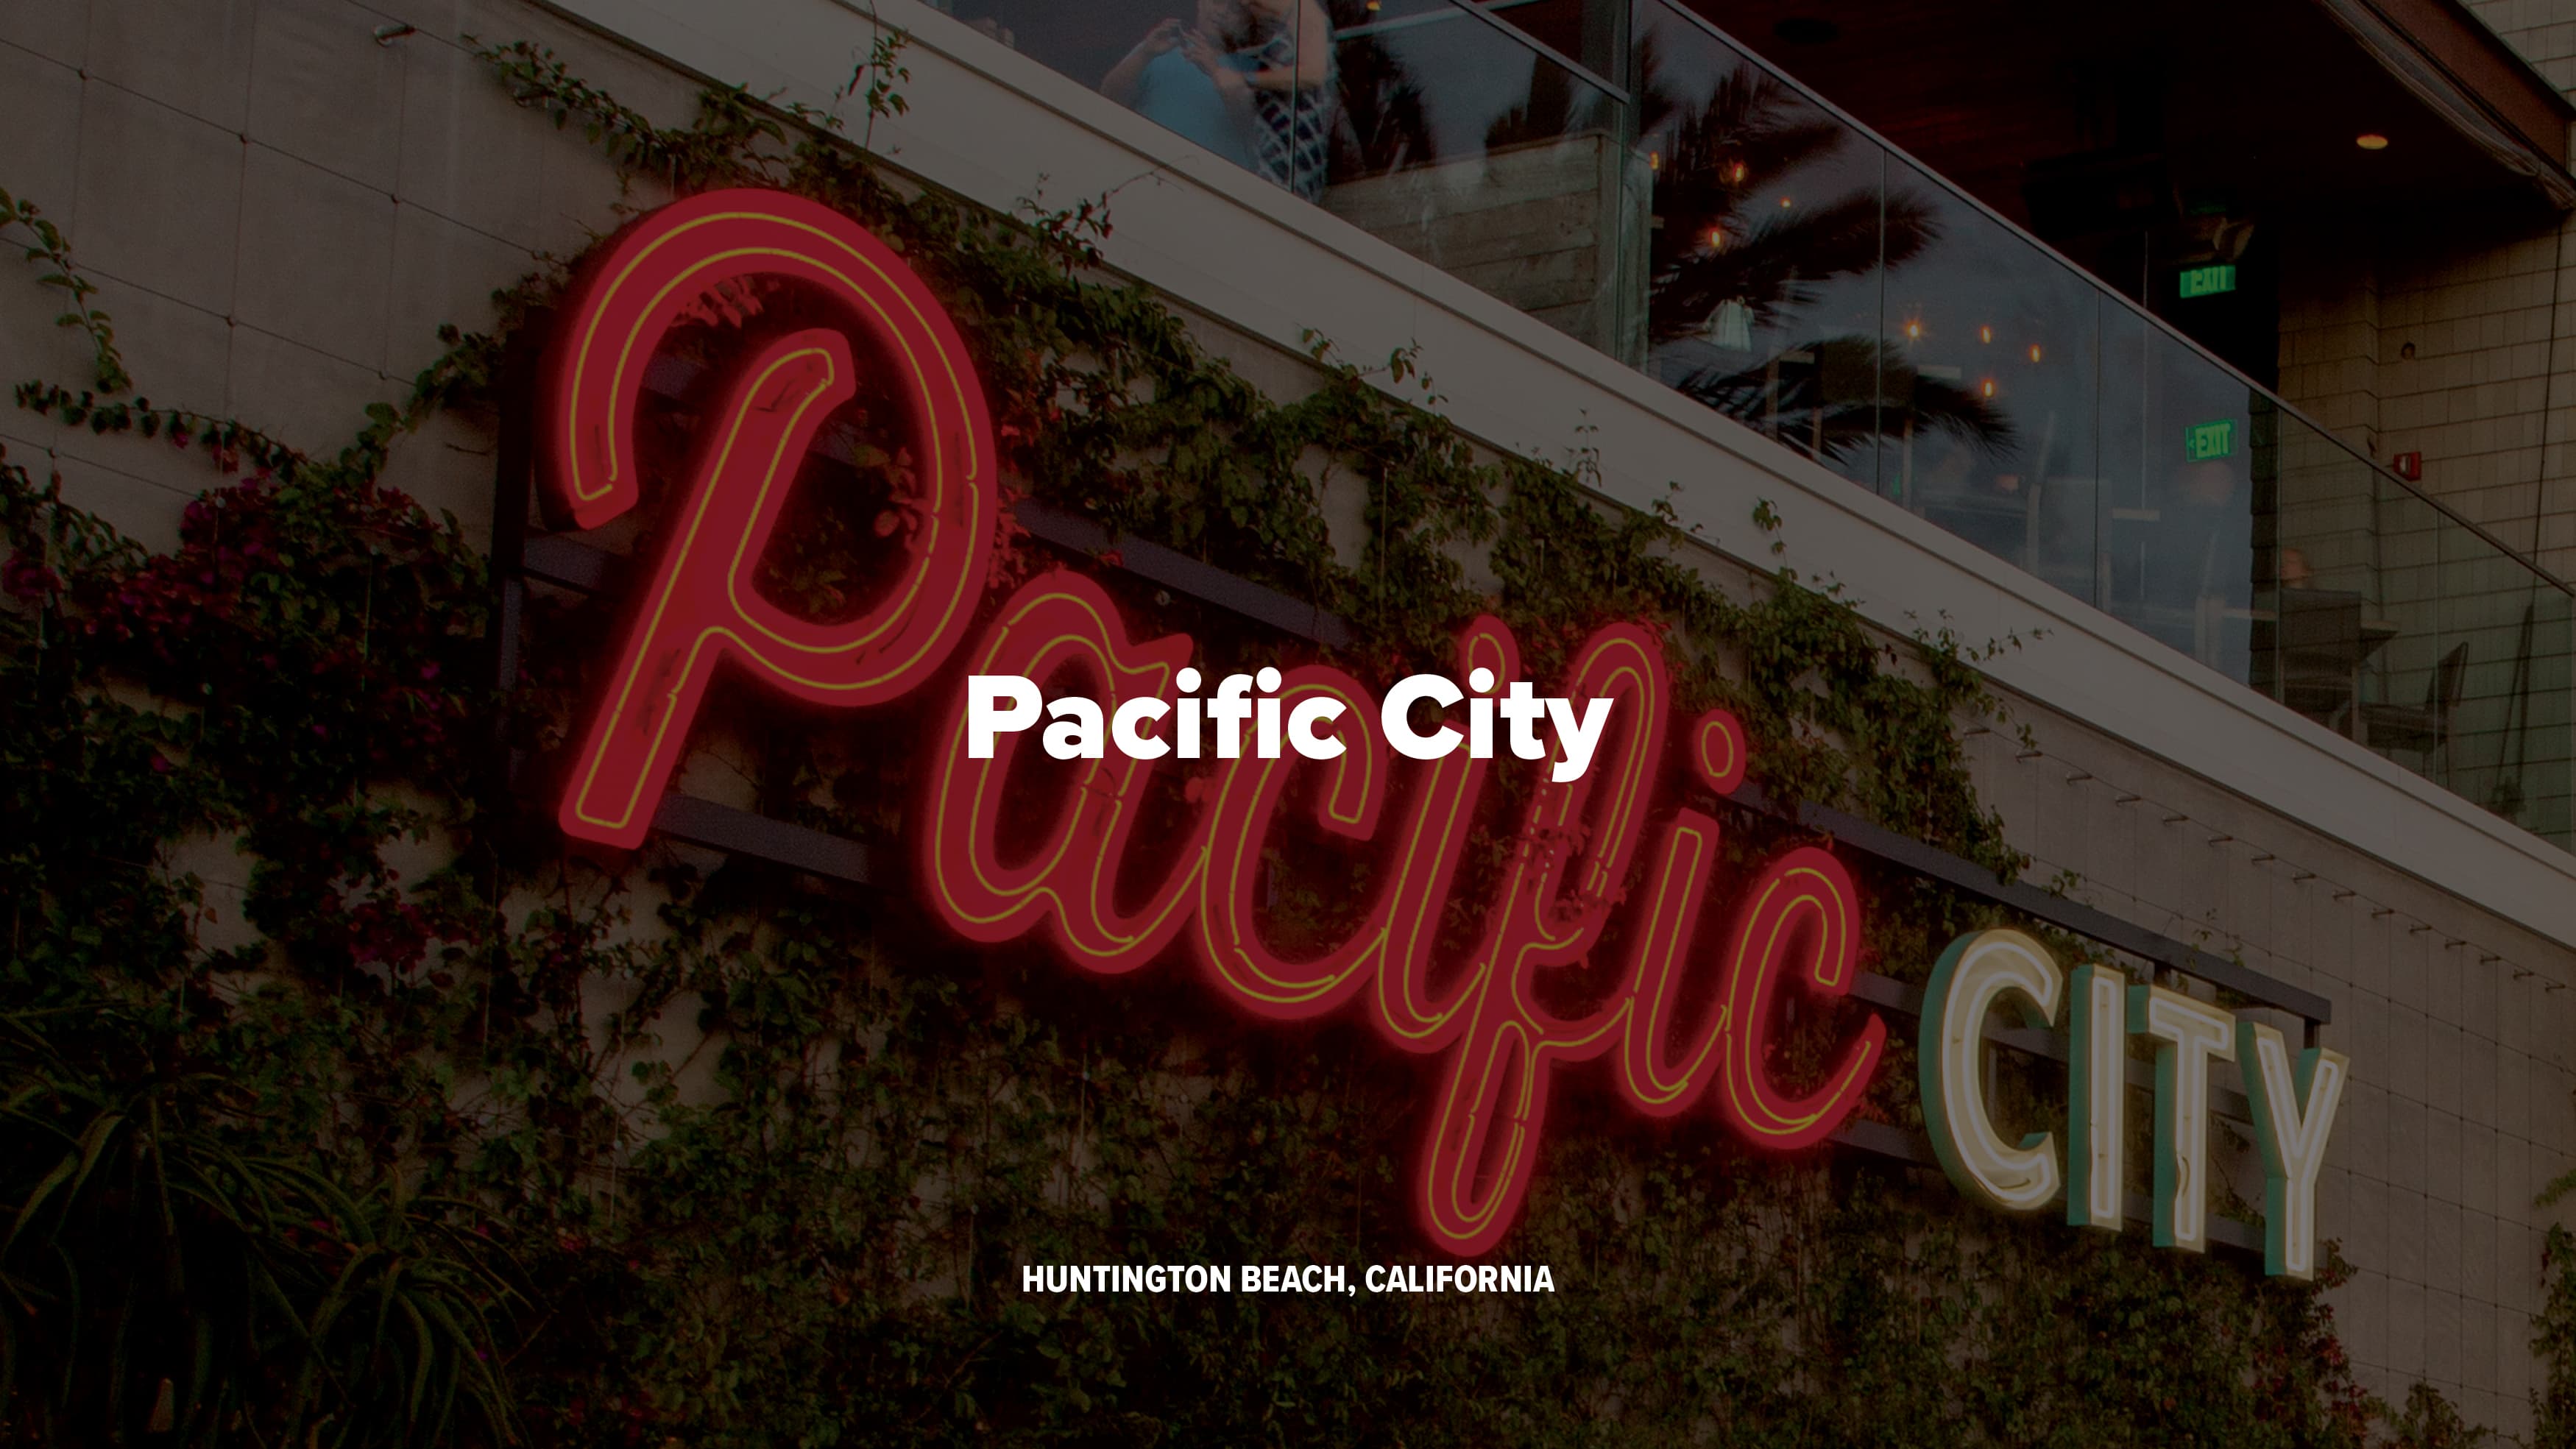 Pacific City branded open-face channel letters mounted to a landscaping wall